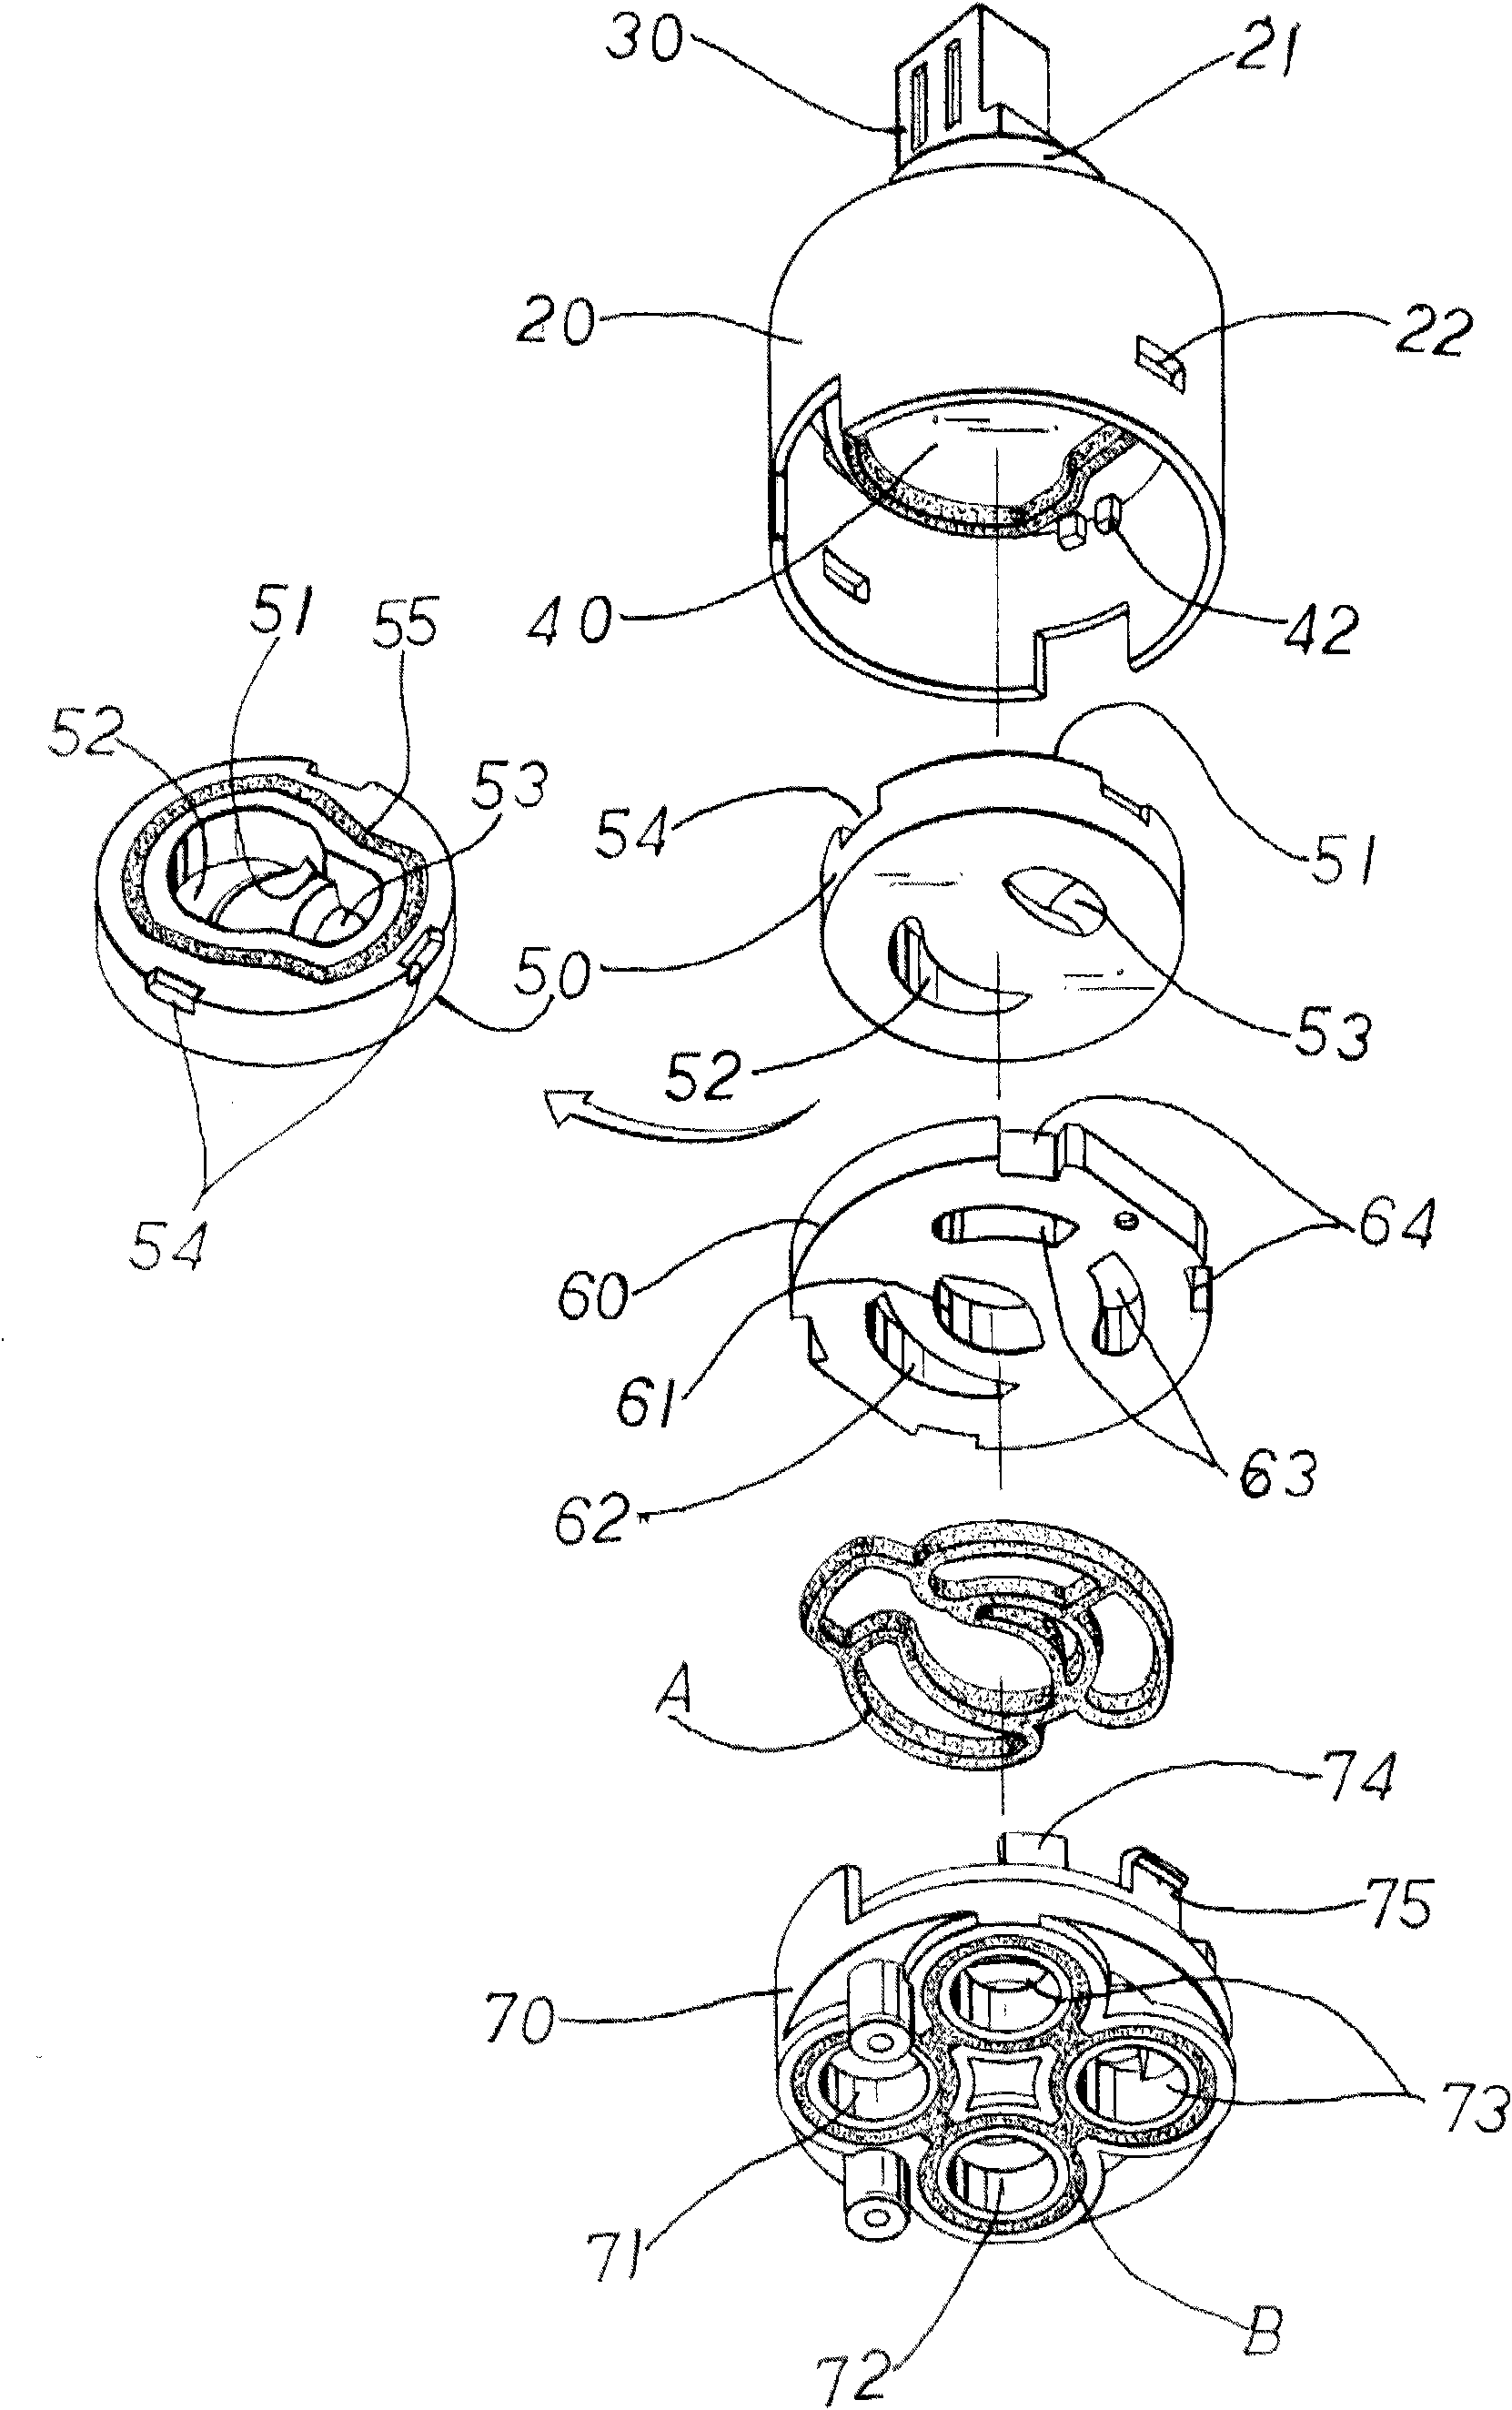 Water control valve seat structure with induction and manual mixed water outlet functions